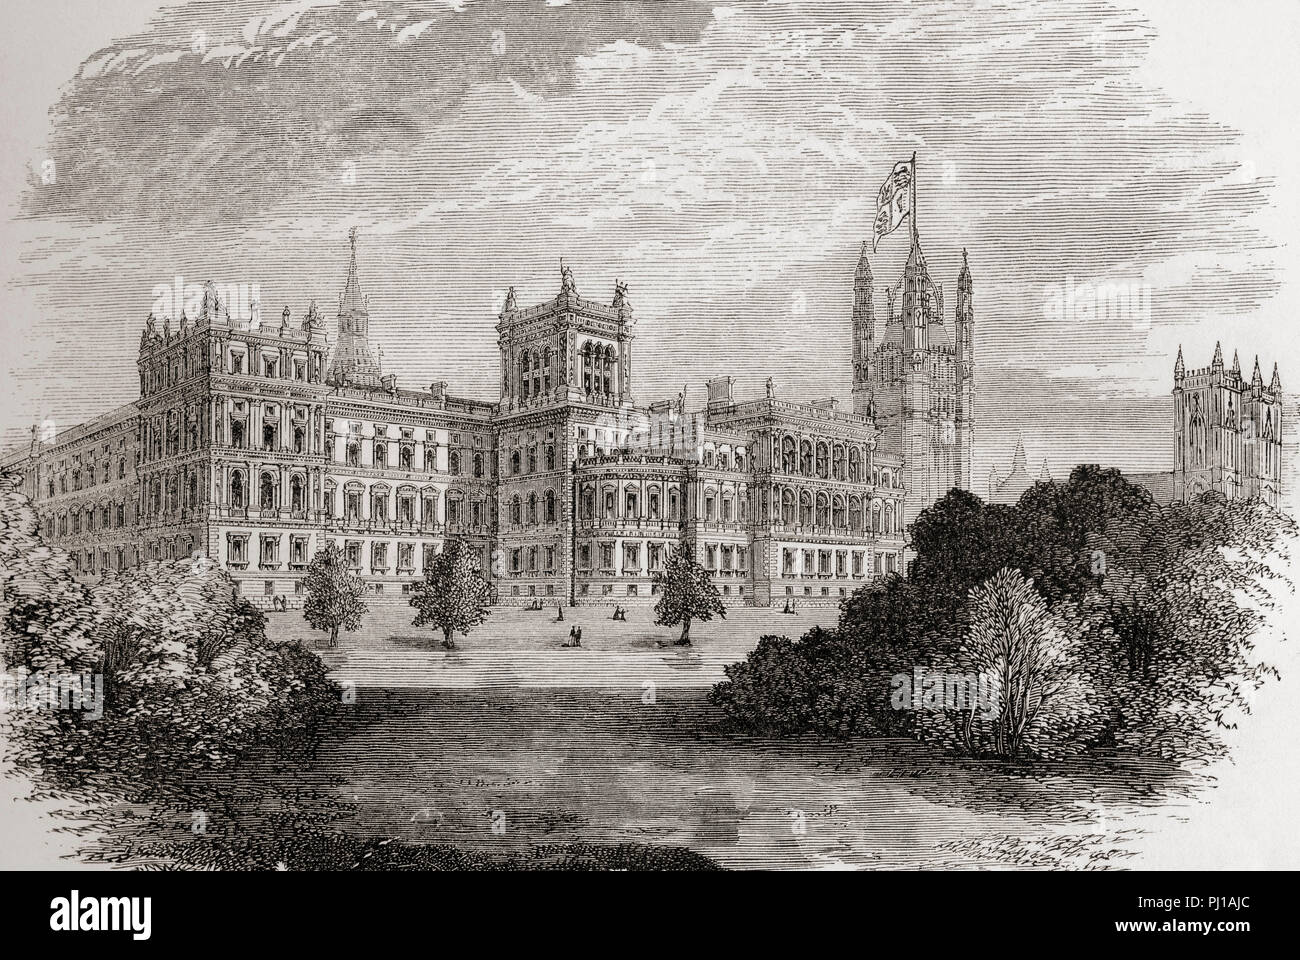 The Foreign Office seen from St. James's Park, London, England in the 19th century.  From London Pictures, published 1890. Stock Photo